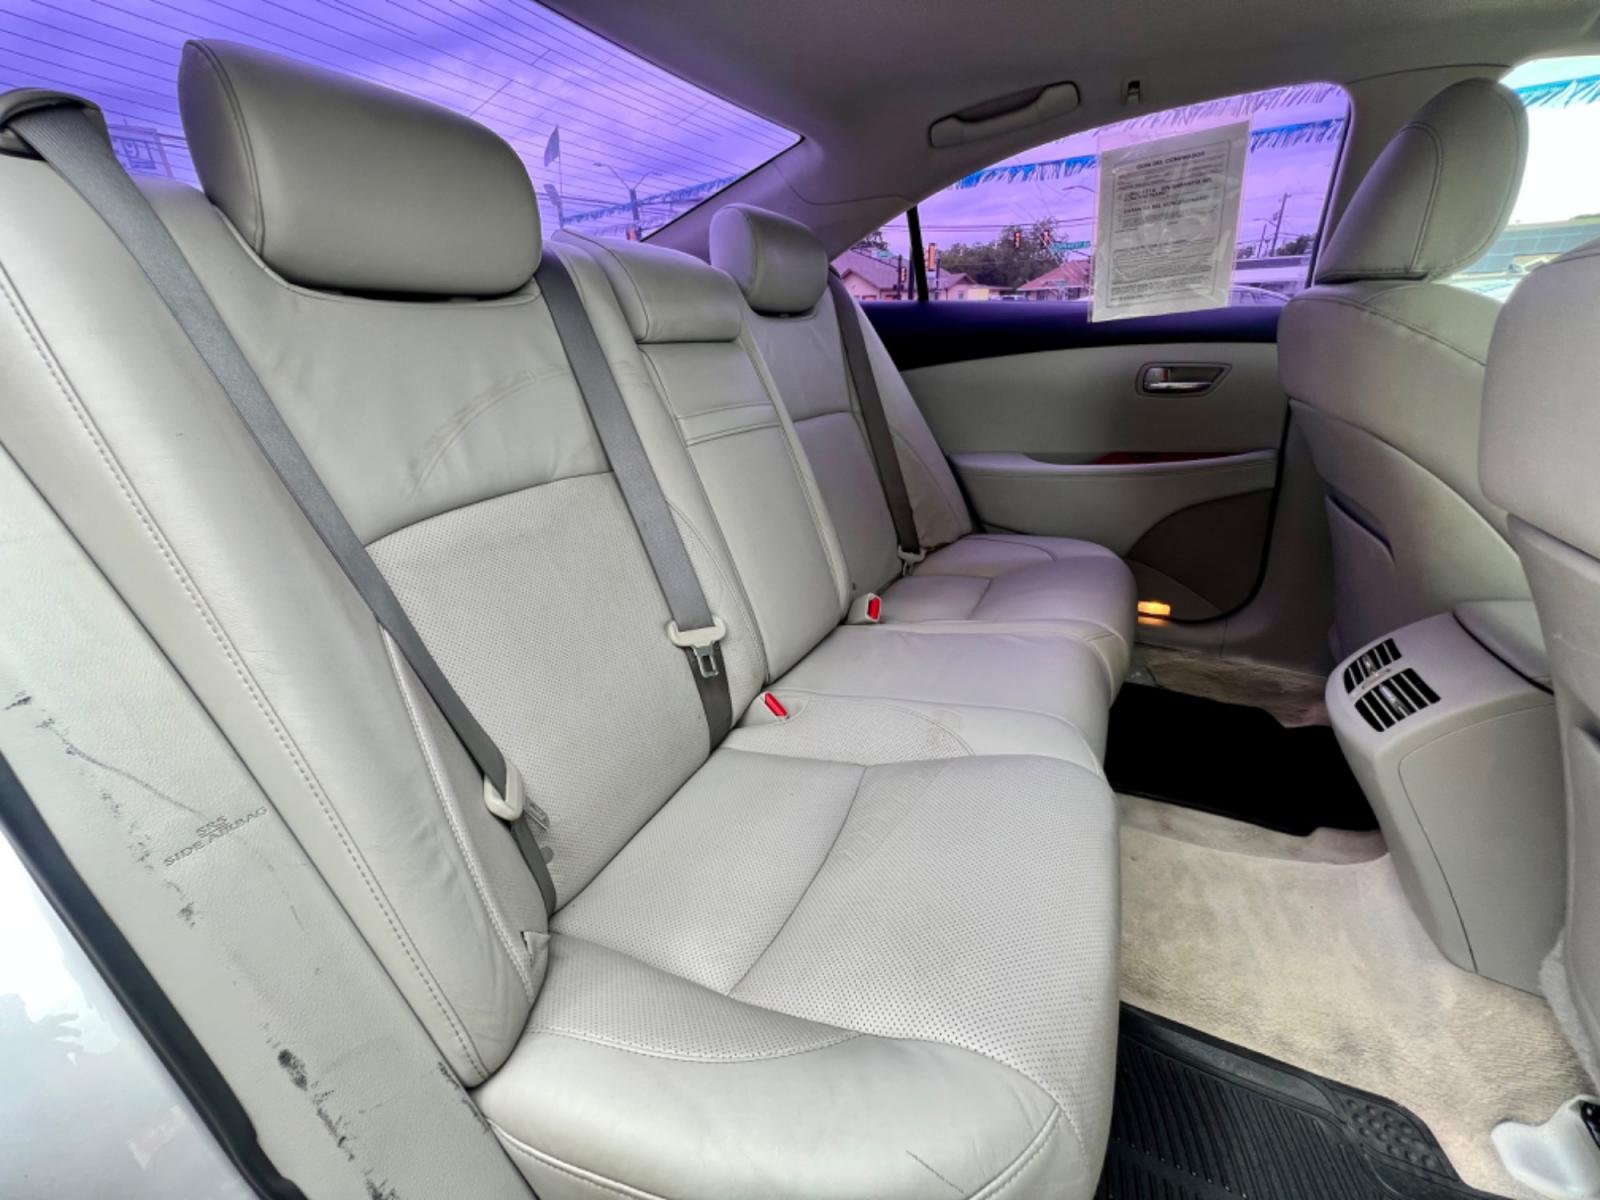 2007 SILVER LEXUS ES 350 BASE (JTHBJ46G072) , located at 5900 E. Lancaster Ave., Fort Worth, TX, 76112, (817) 457-5456, 0.000000, 0.000000 - CASH CAR ONLY, NO FINANCING AVAILABLE. WE'VE SLASHED THE PRICE! NOW ONLY $5,391! THIS 2007 LEXUS ES 350 BASE 4 DOOR SEDAN RUNS AND DRIVES GREAT. IT IS EQUIPPED WITH A CD PLAYER, AM/FM RADIO AND AN AUX PORT. THE TIRES ARE IN GOOD CONDITION AND STILL HAVE TREAD LEFT ON THEM. THIS CAR WILL NOT LAST S - Photo #13